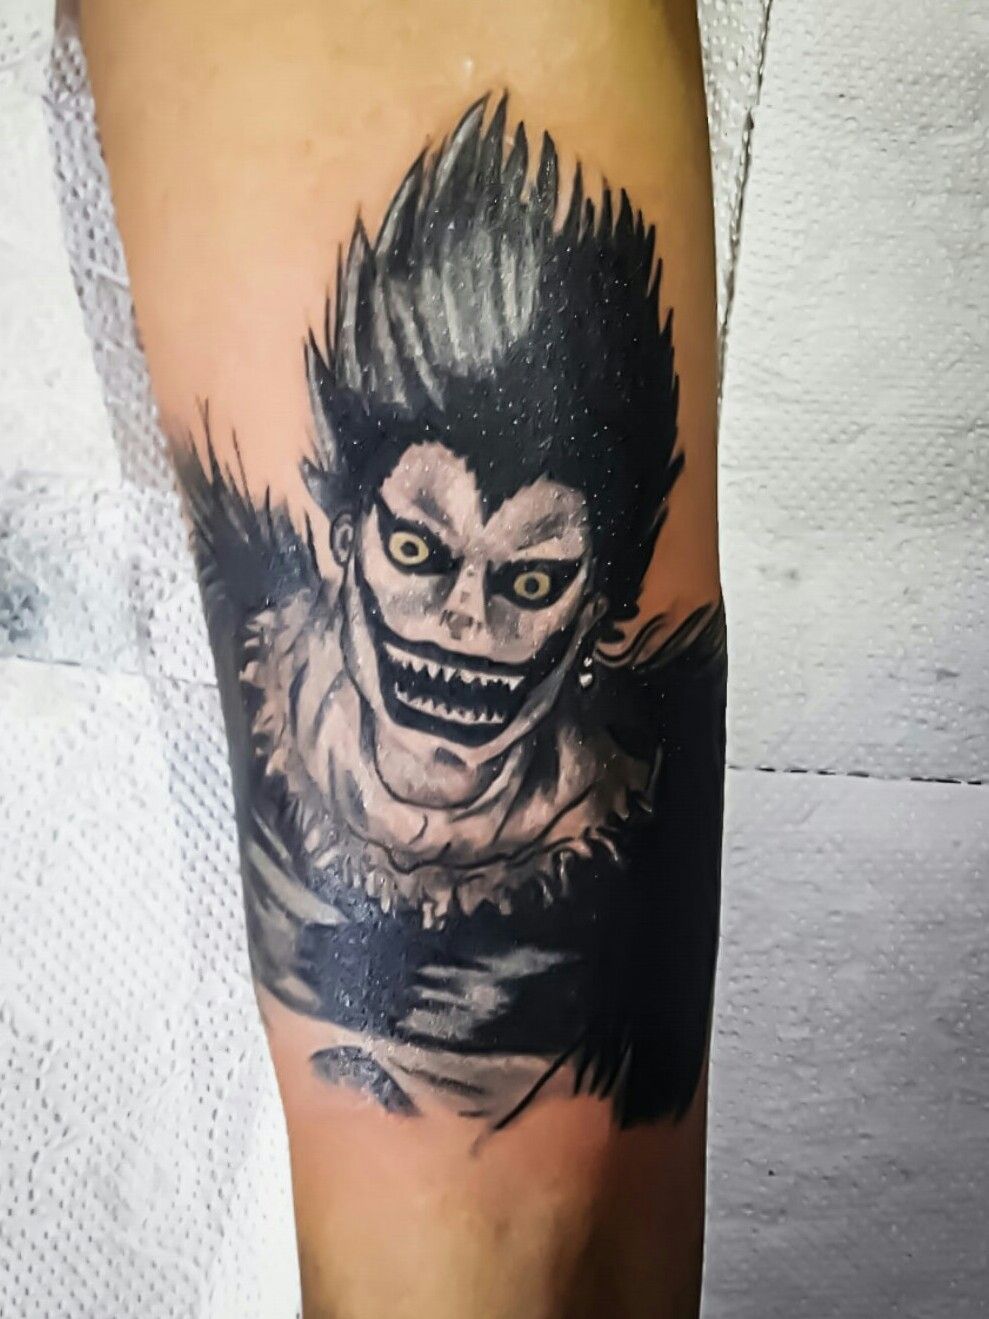 My Death Note tattoo by Robbwild on IG  rdeathnote